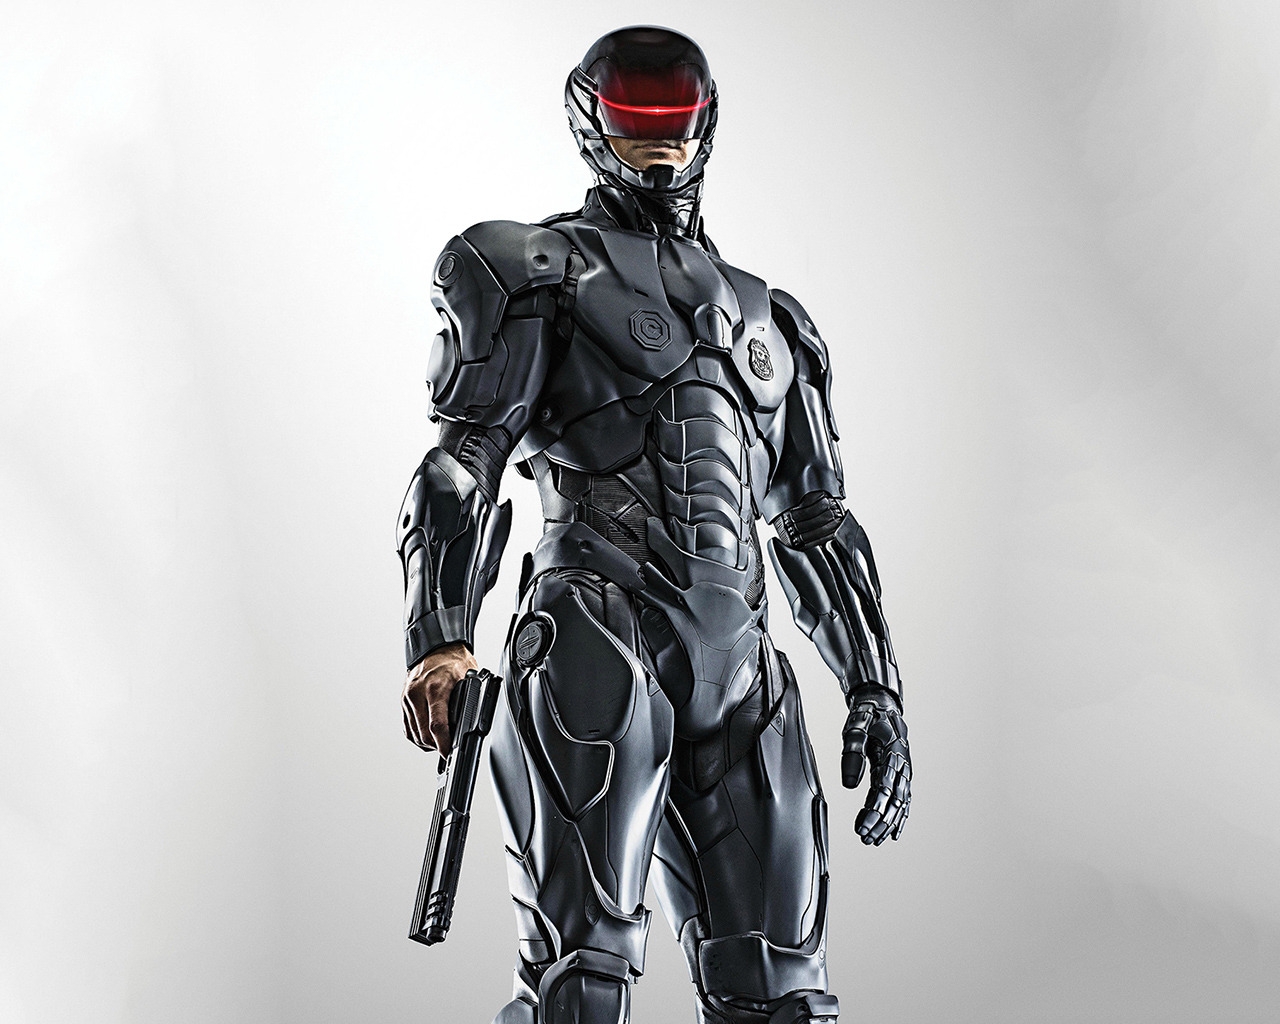 Robocop 2014 Poster for 1280 x 1024 resolution